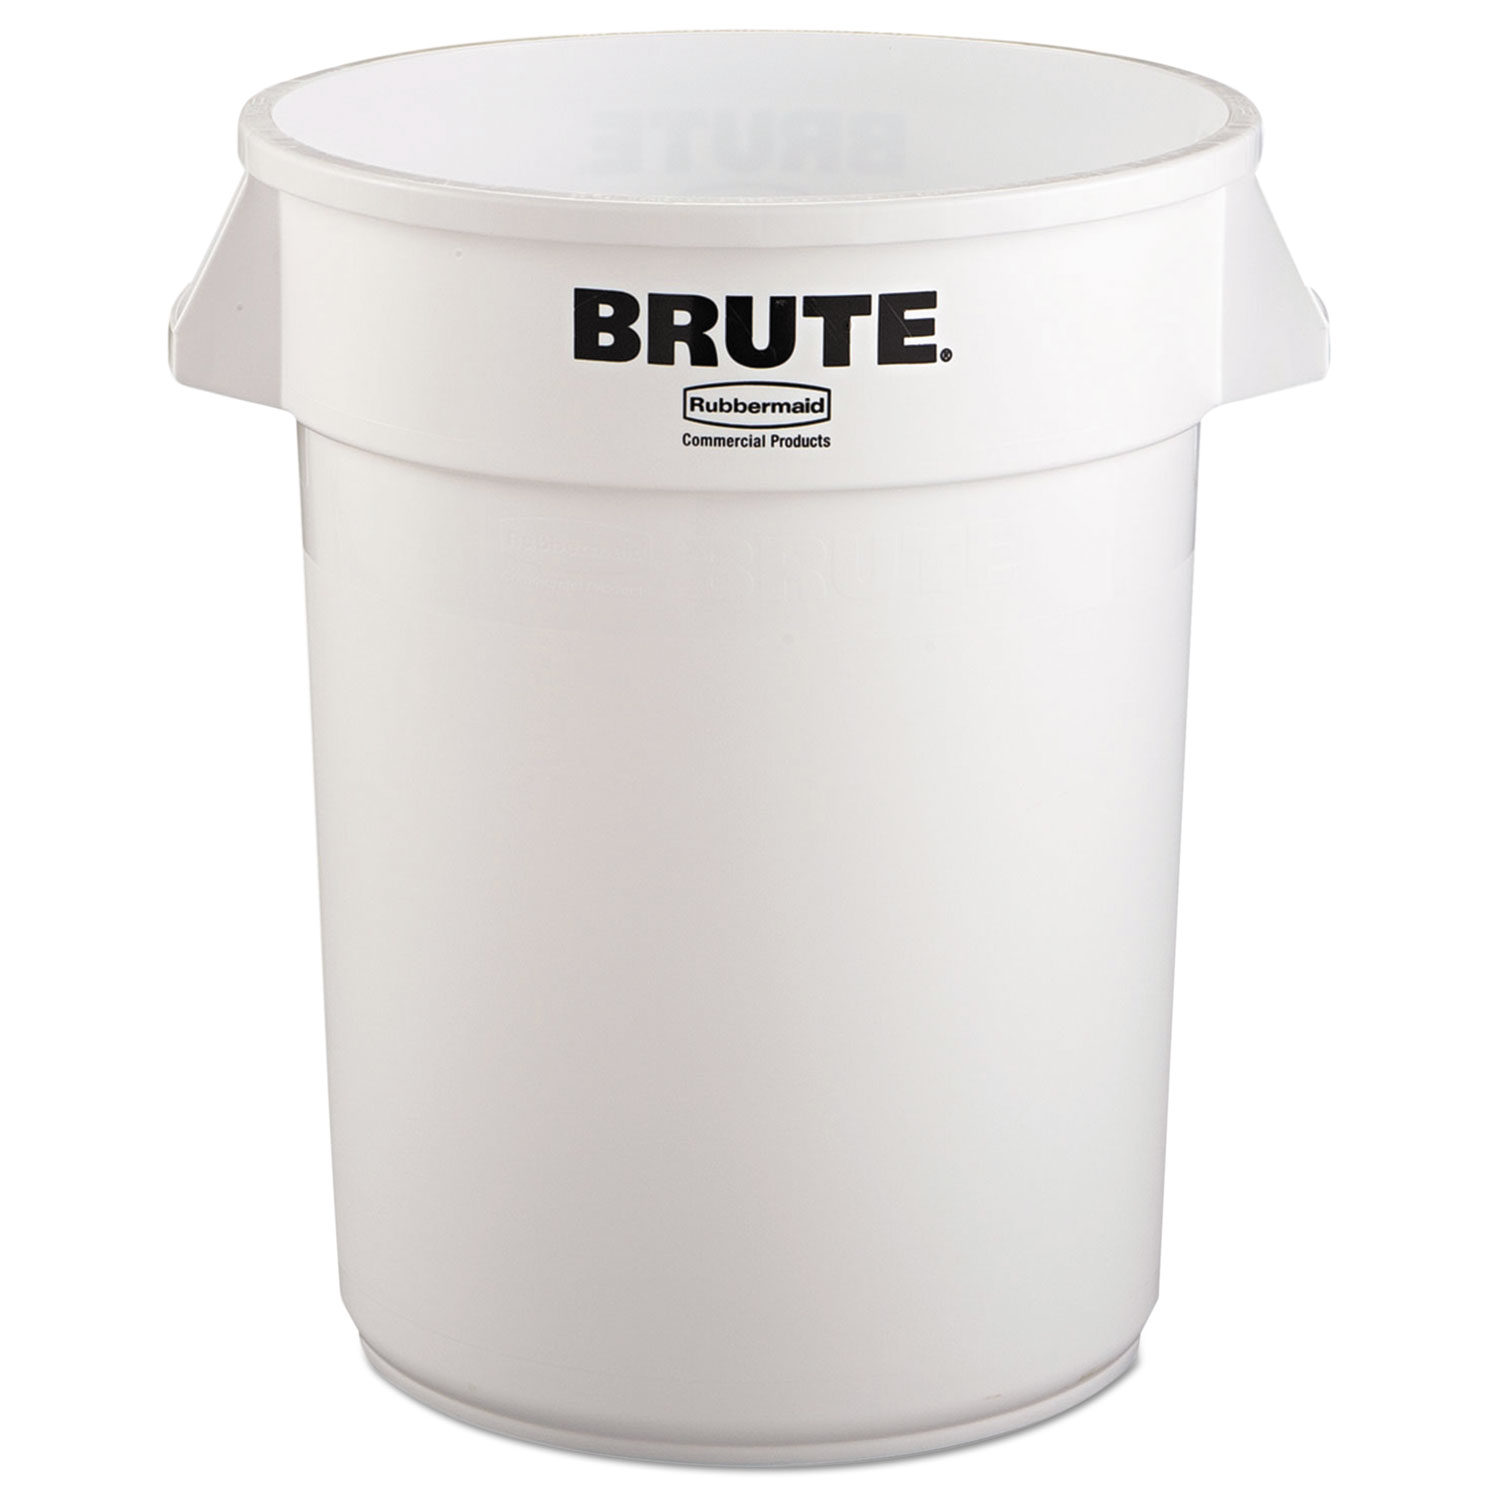 Rubbermaid Round Brute Container - RCP263200GY 